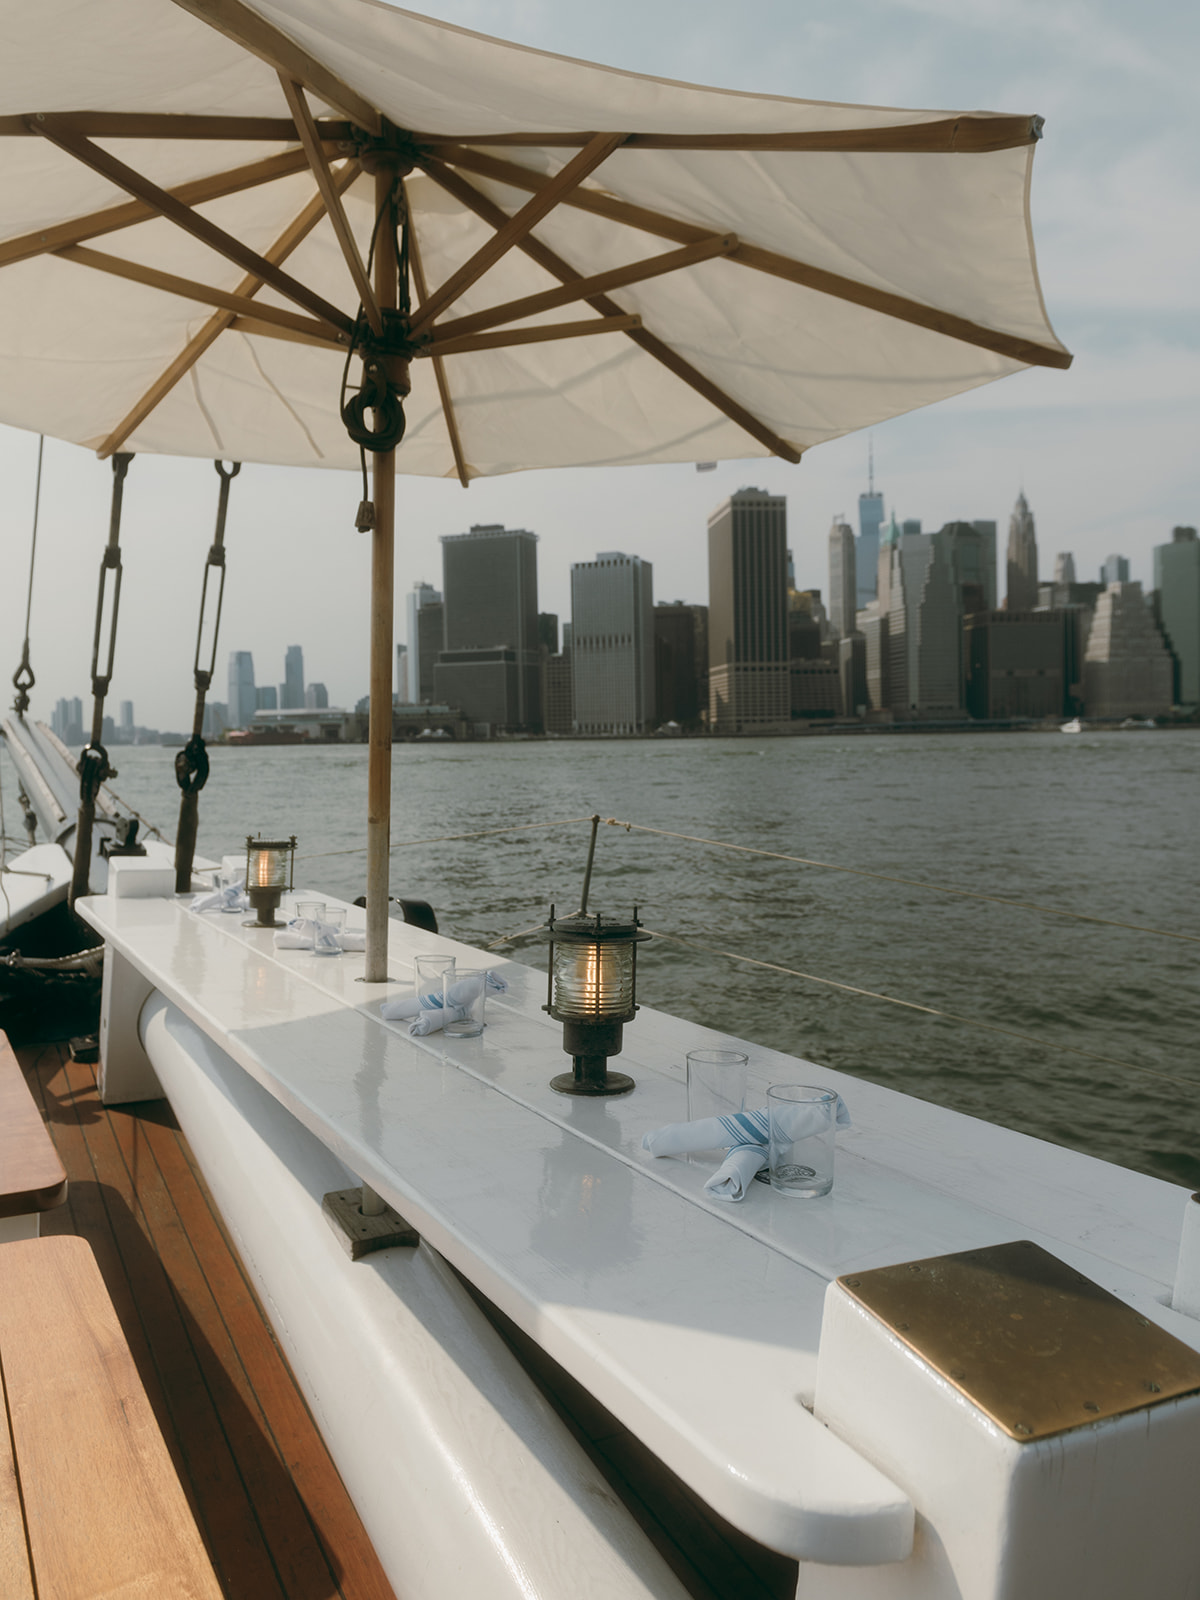 Waterfront wedding with Manhattan skyline views at Pilot Brooklyn by Taylor English